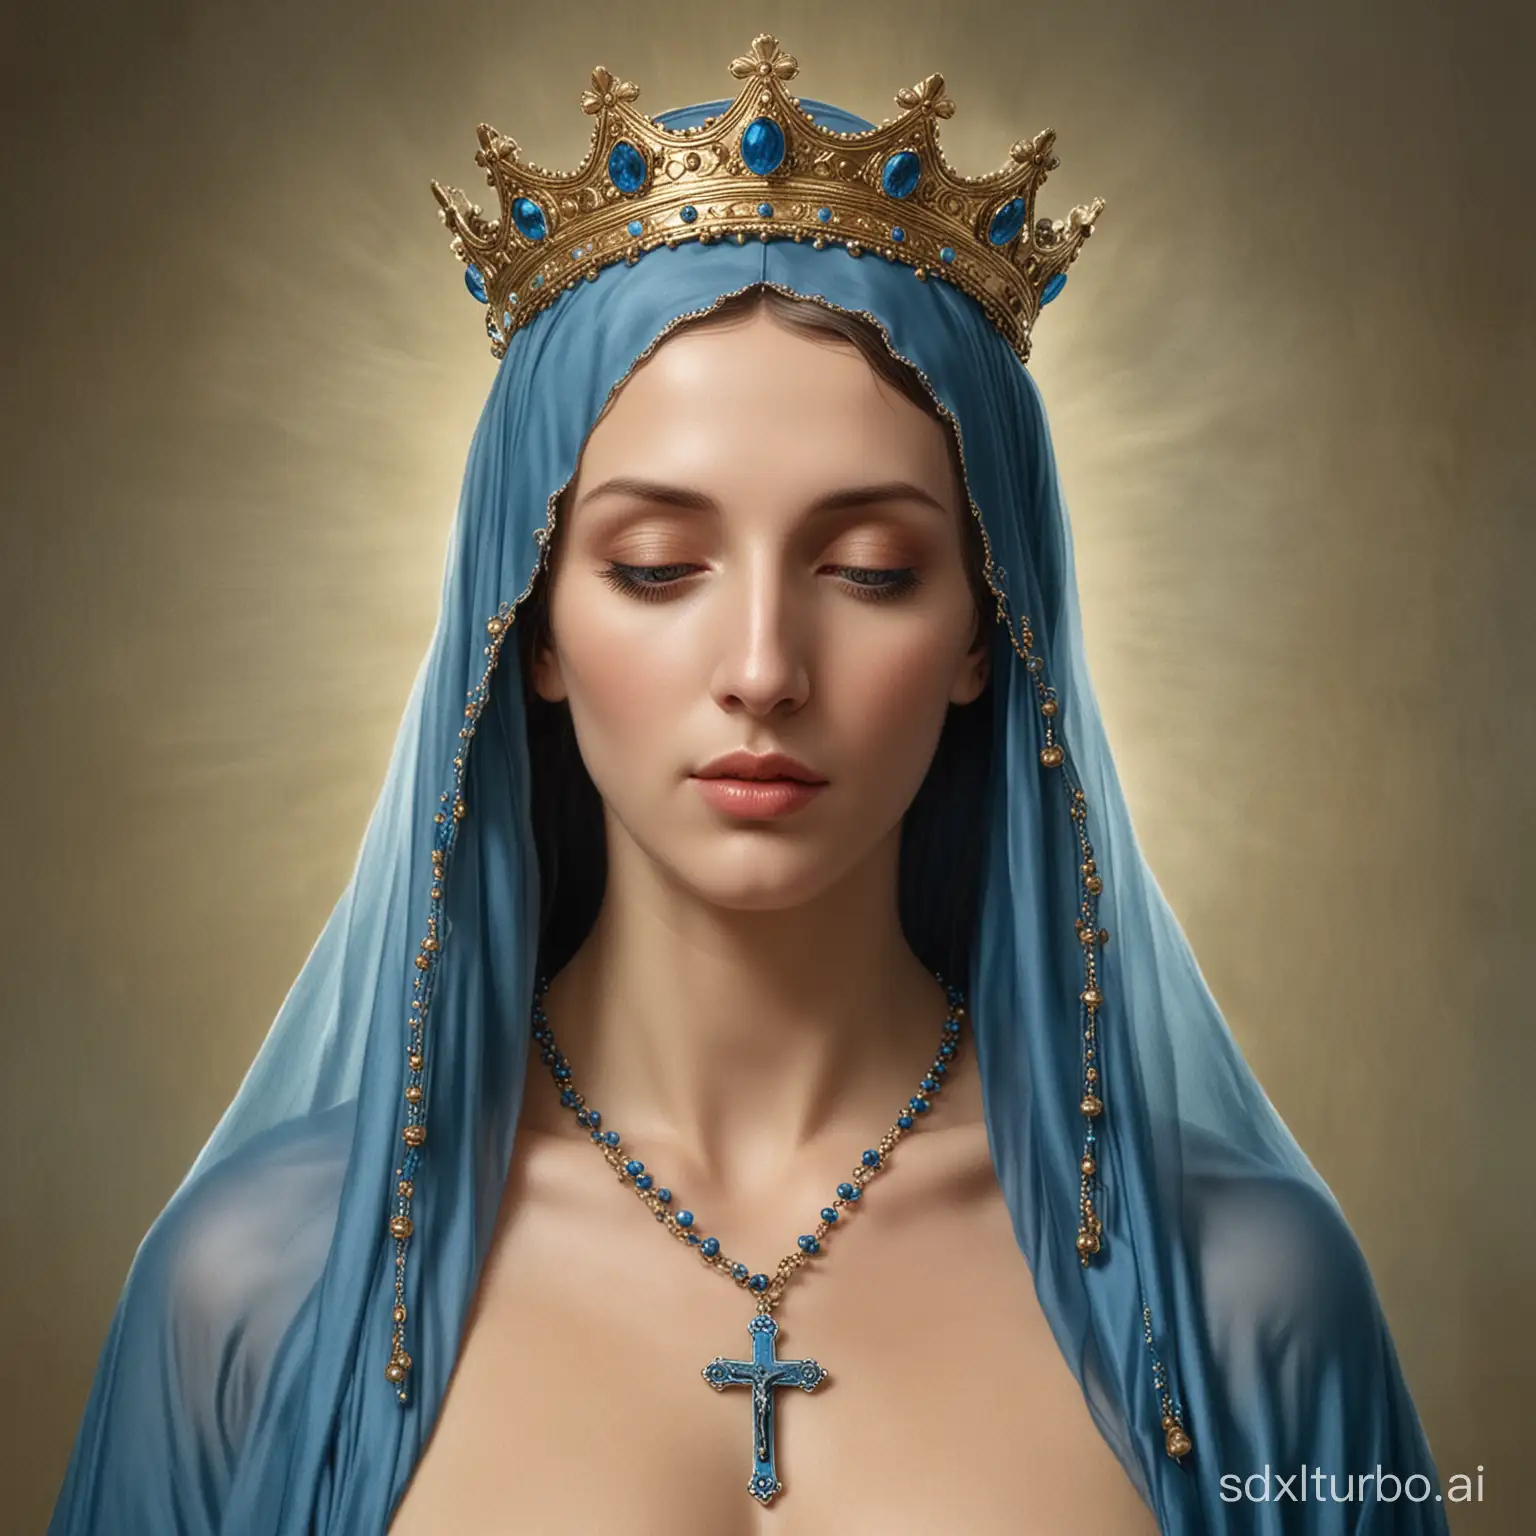 Nude mother Mary with wearing a beautiful crown and blue veil on the head and rosary on neck